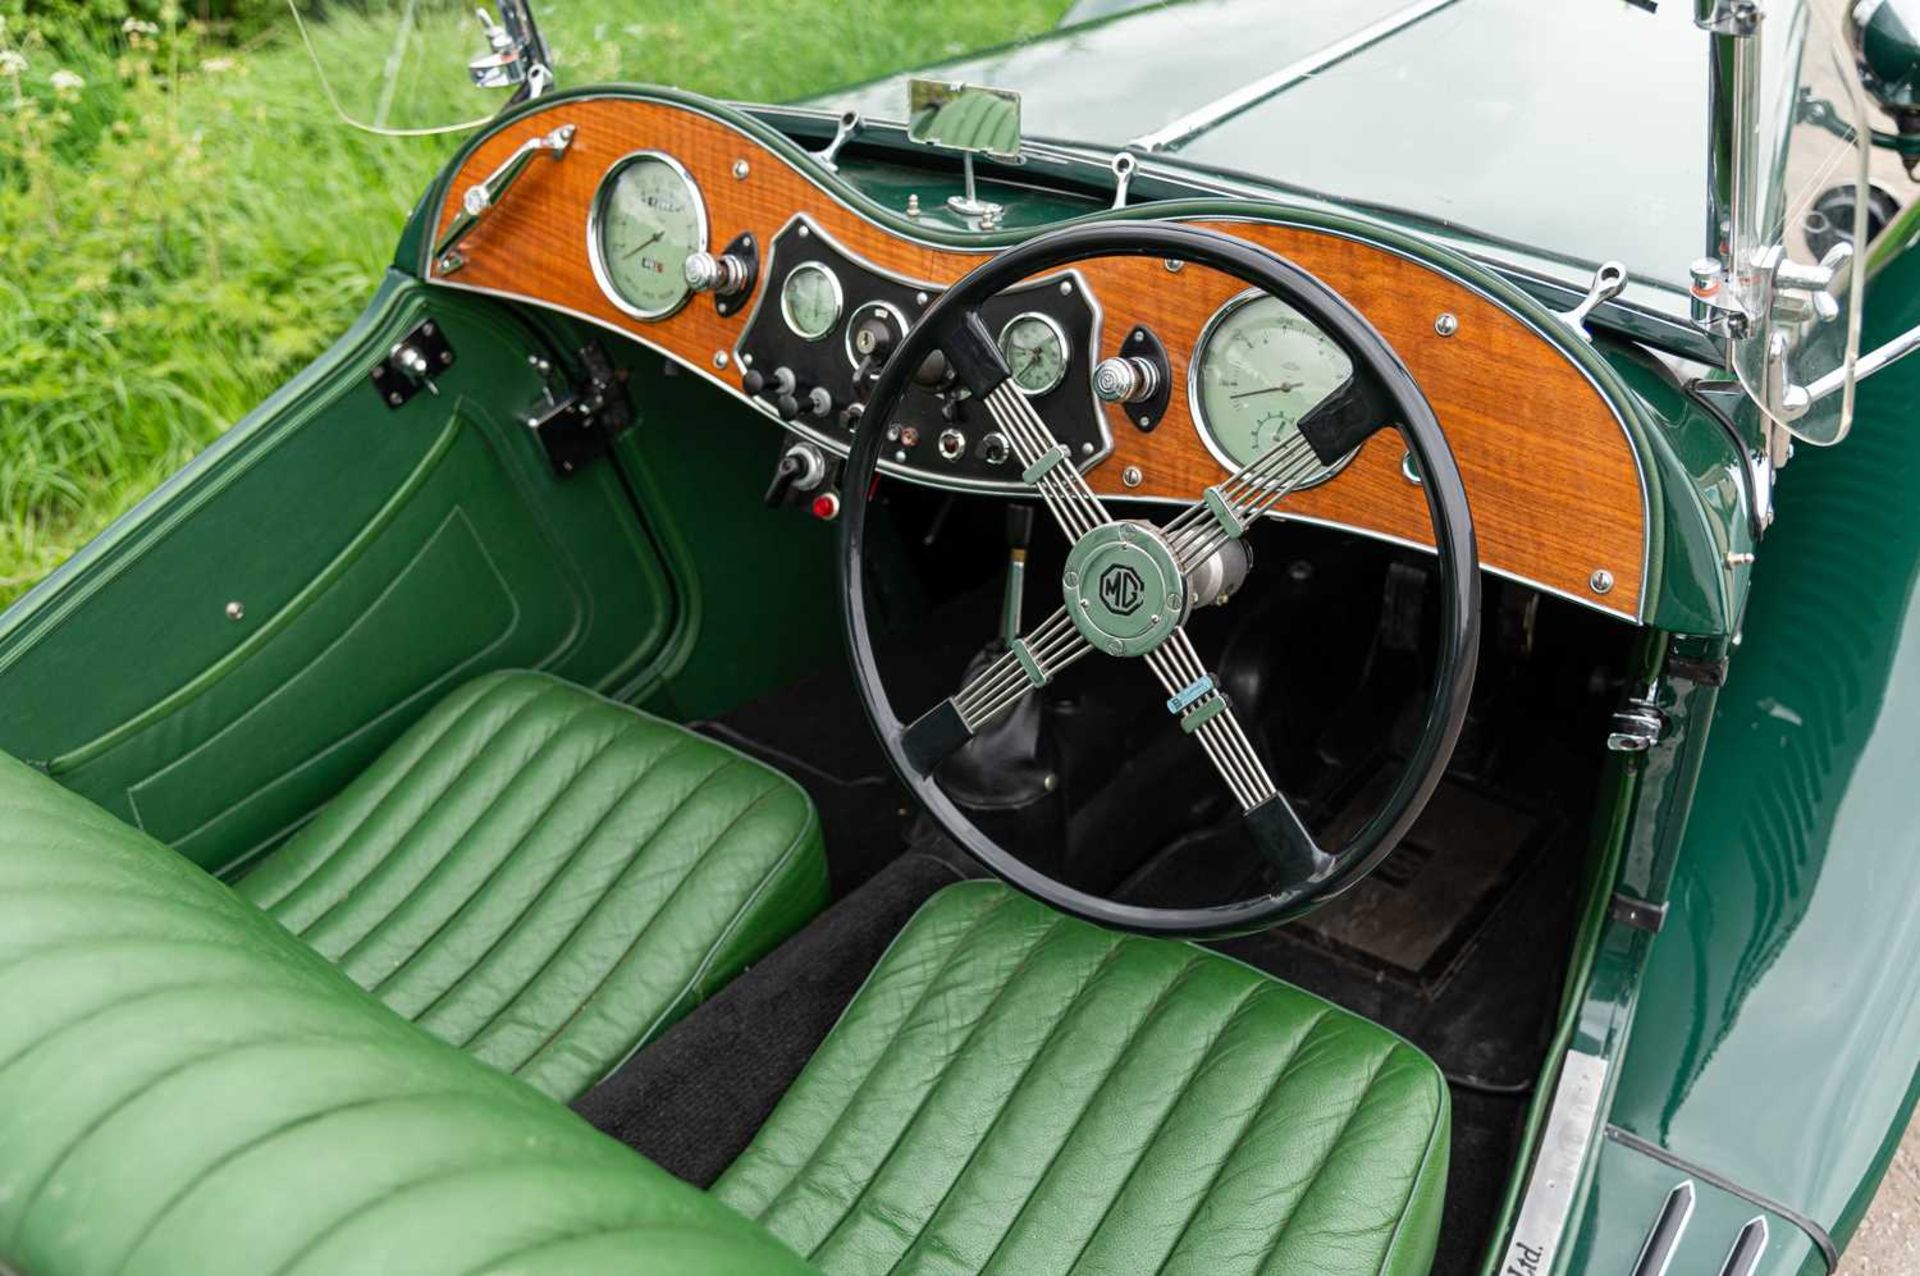 1947 MG TC Midget  Fully restored, right-hand-drive UK home market example - Image 64 of 76